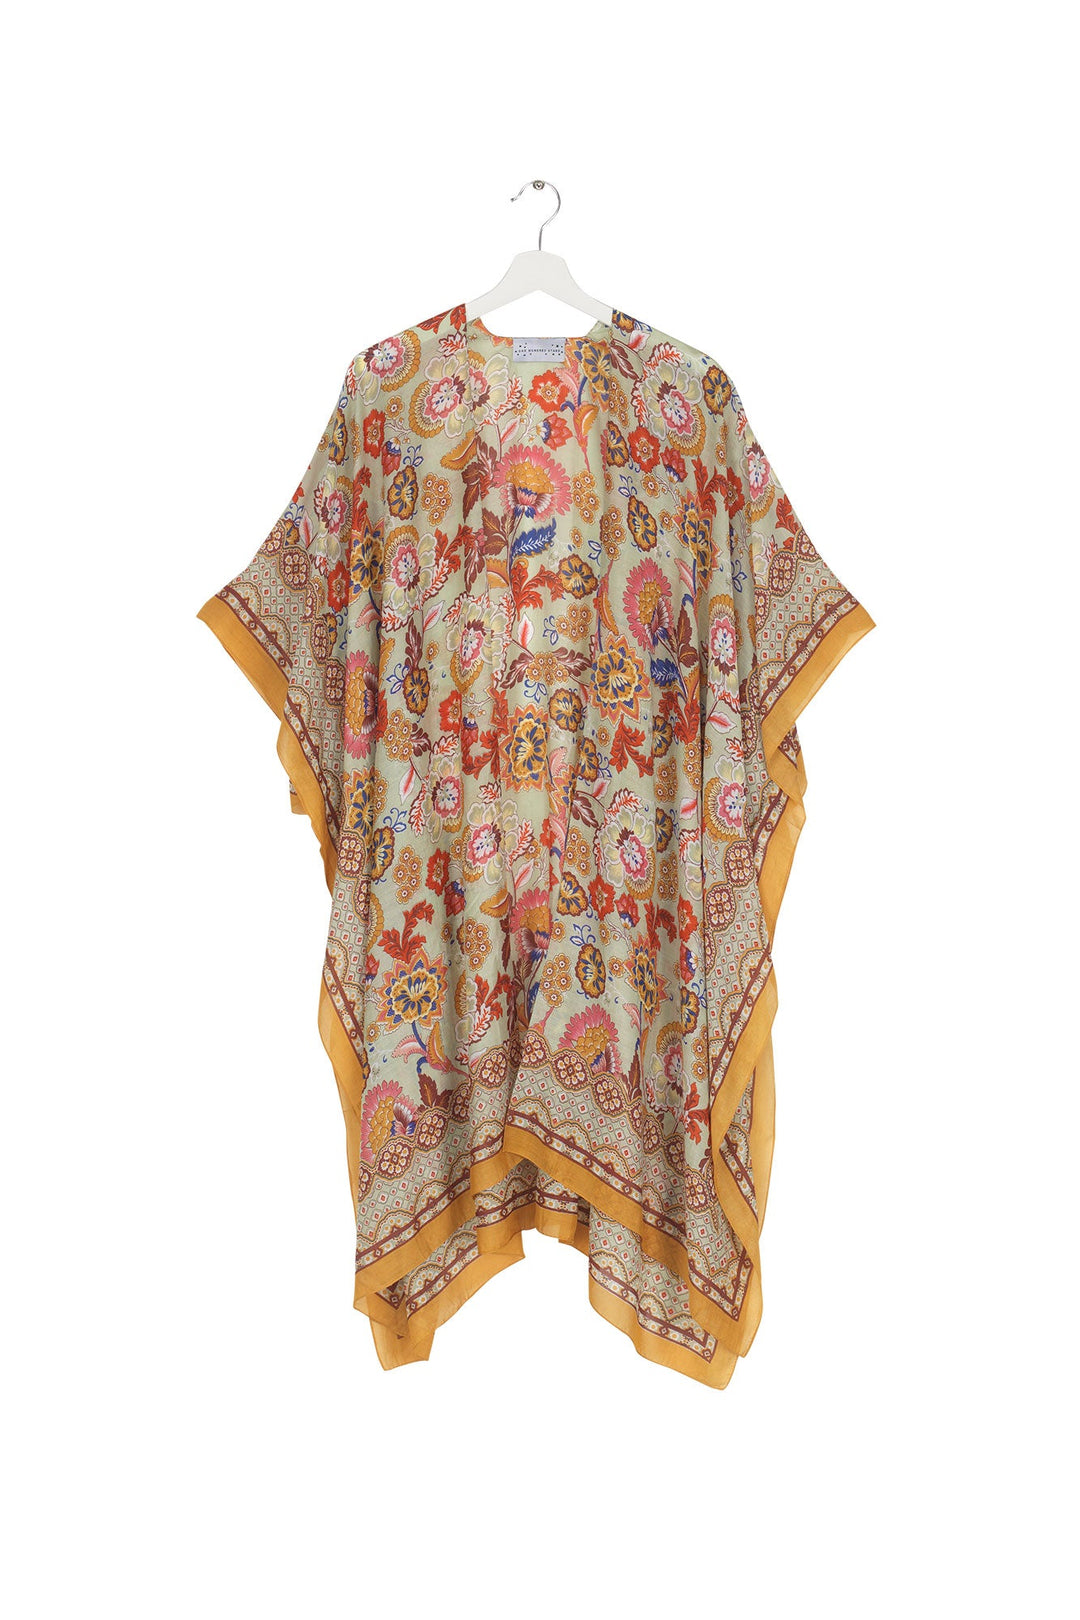 Women's lightweight throwover shawl  in taupe with Indian flower floral print by One Hundred Stars 